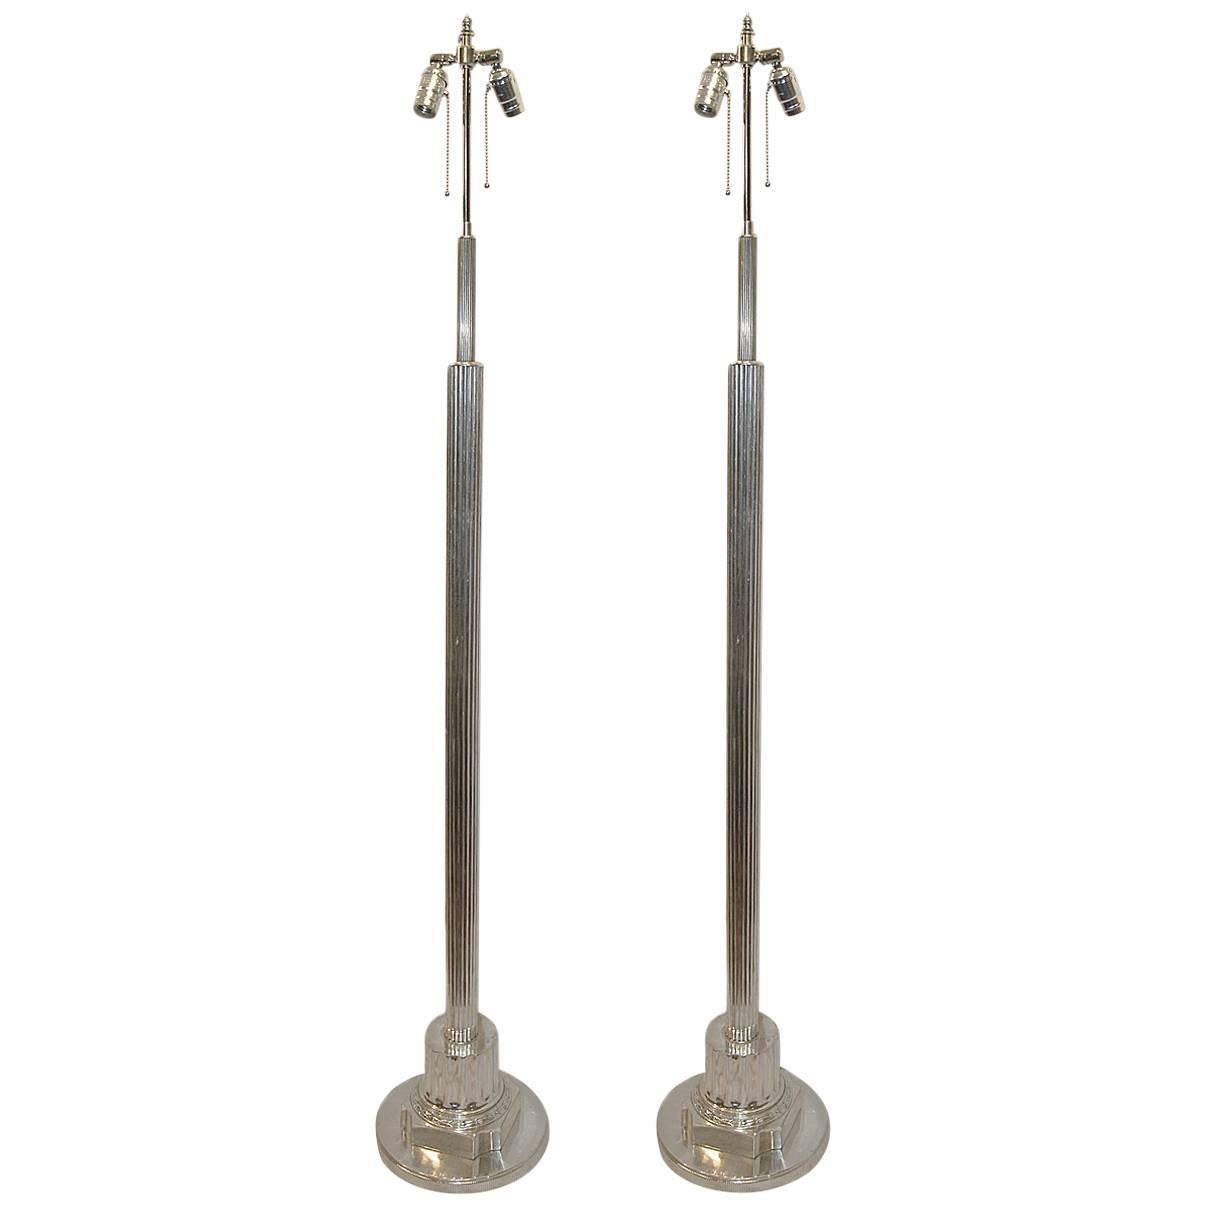 Pair of Neoclassic Silver Plated Floor Lamps